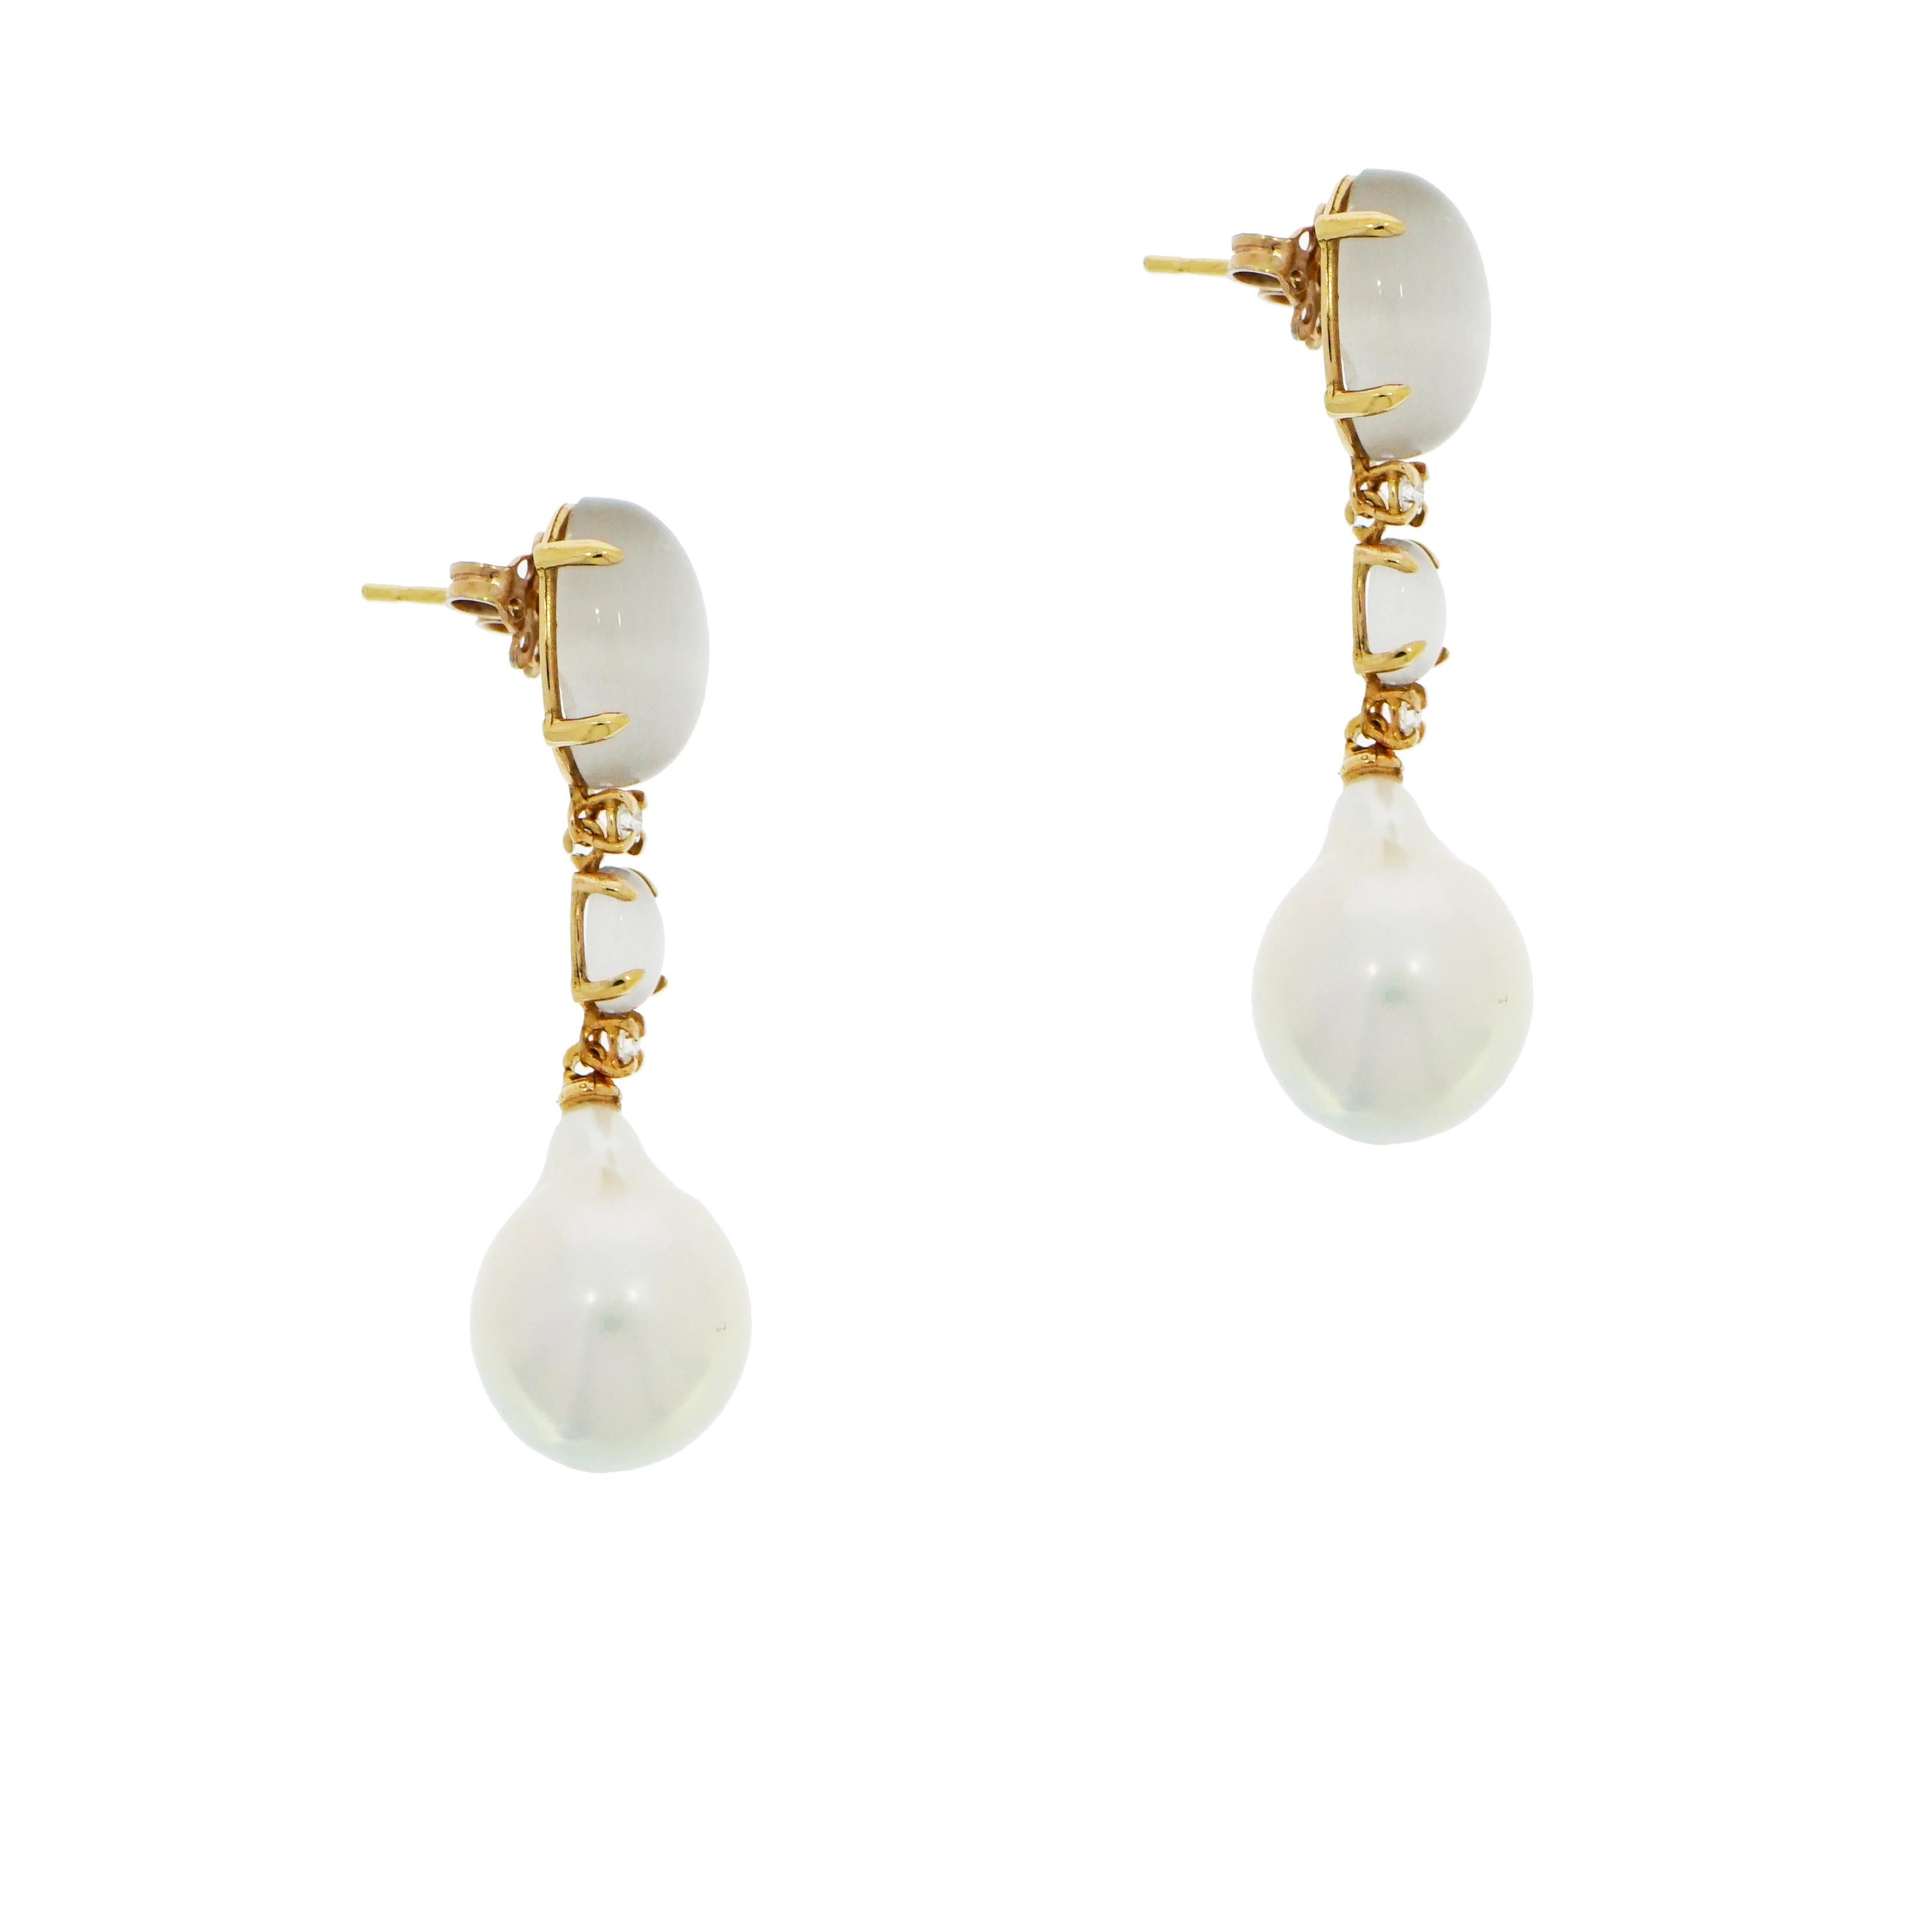 This delicately feminine moonstone, diamond and baroque pearl drop earrings accented with round diamonds are certain to become a timeless accessory.
This drop earrings measures approximately 1.75 inch long and the grayish moonstone 14 x 10mm with